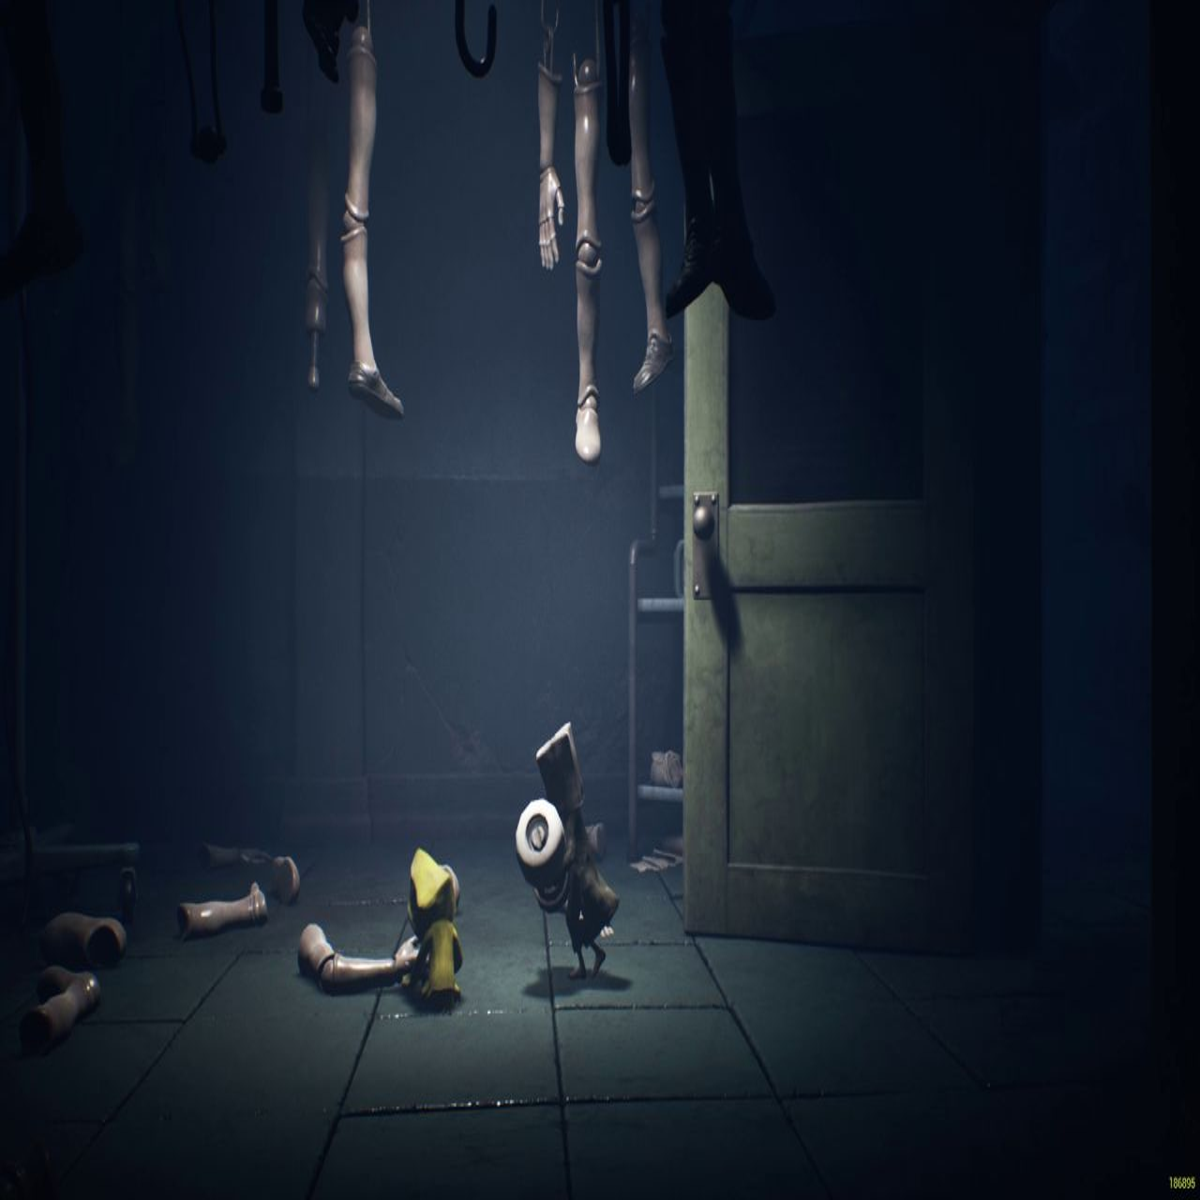 MONO flies out of the park Little Nightmares 2 funny glitch 